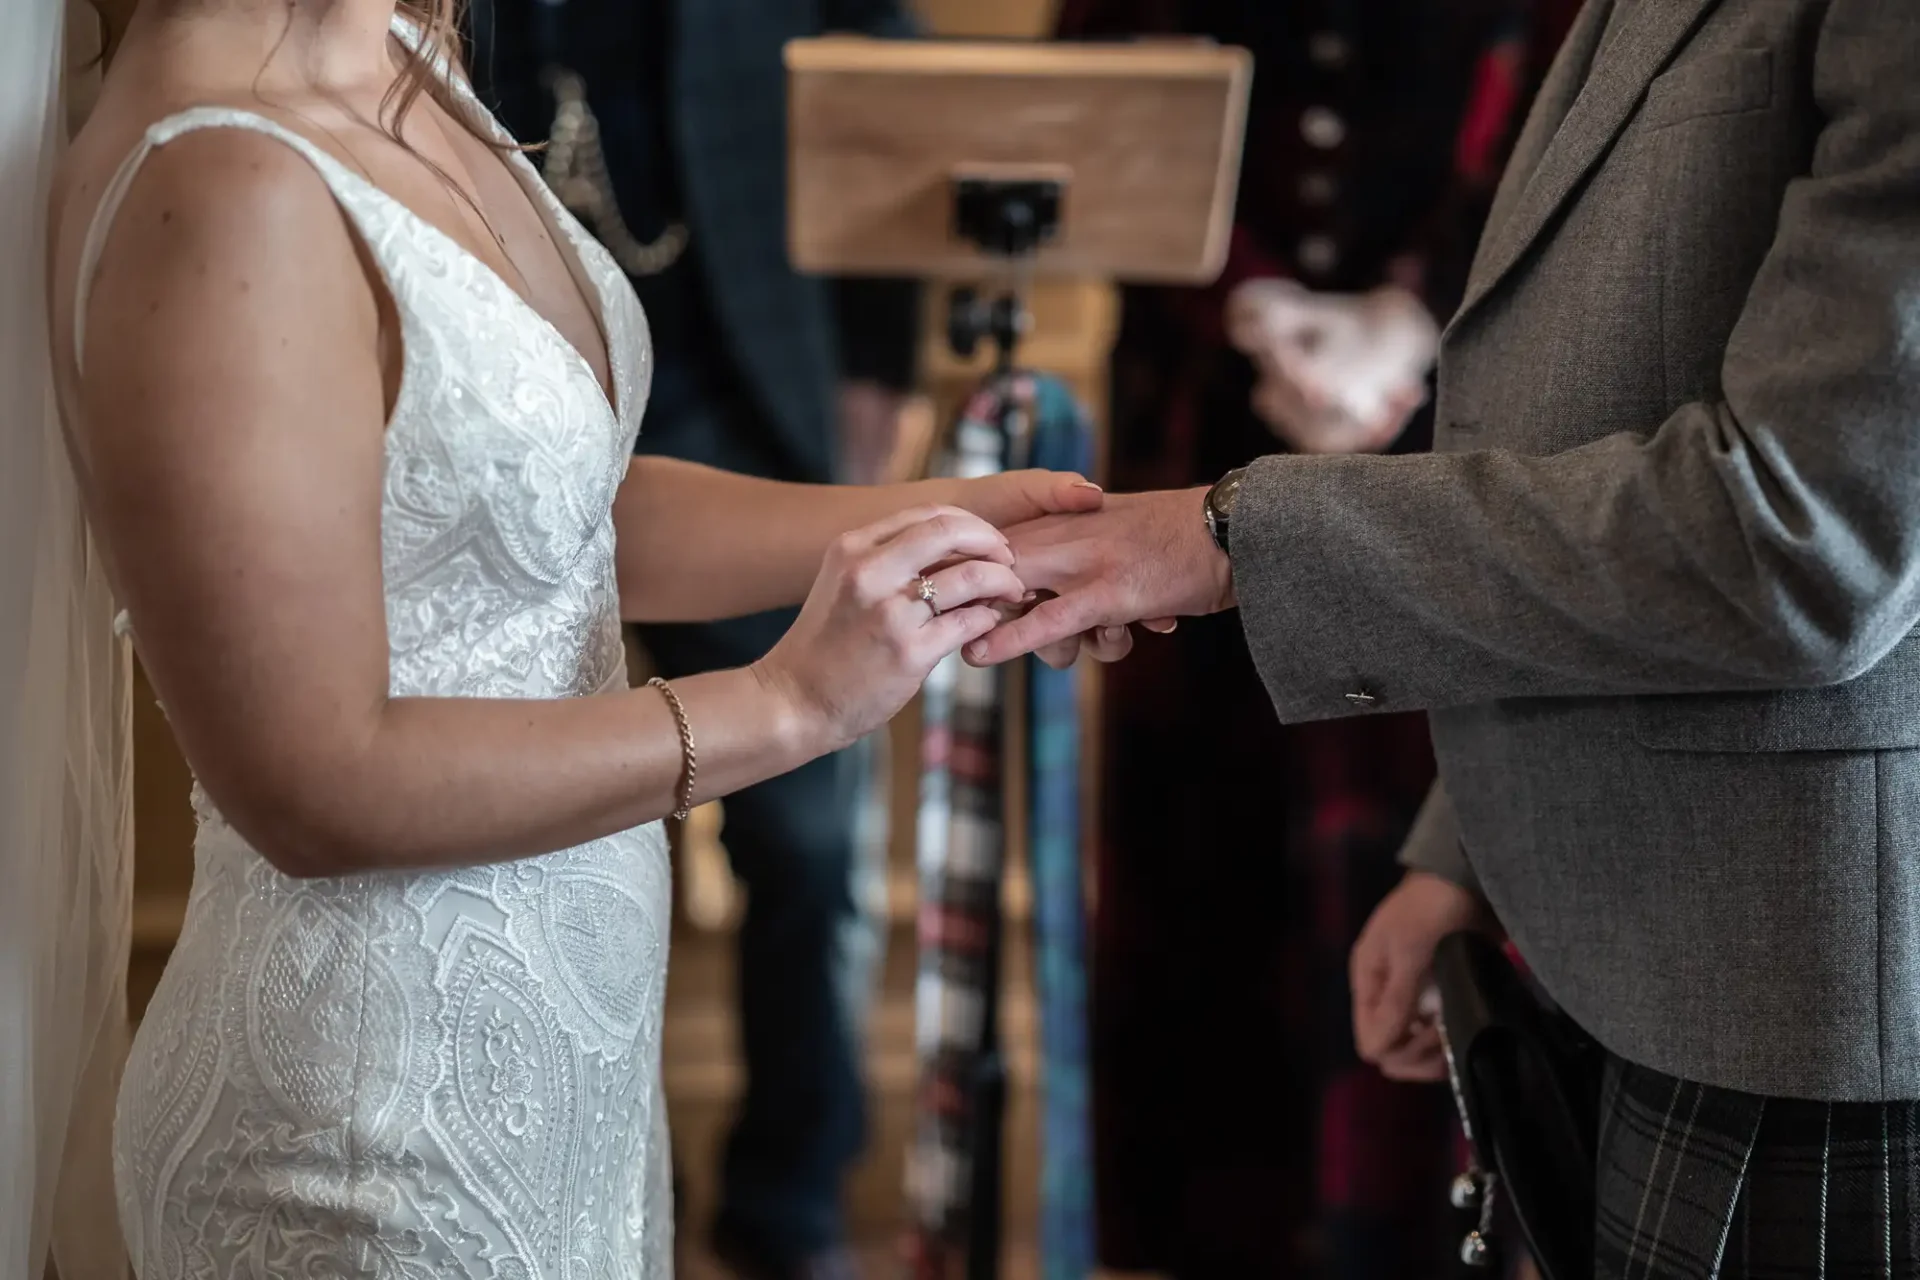 Bride in a lace dress exchanges rings with groom in a tartan kilt during a wedding ceremony.